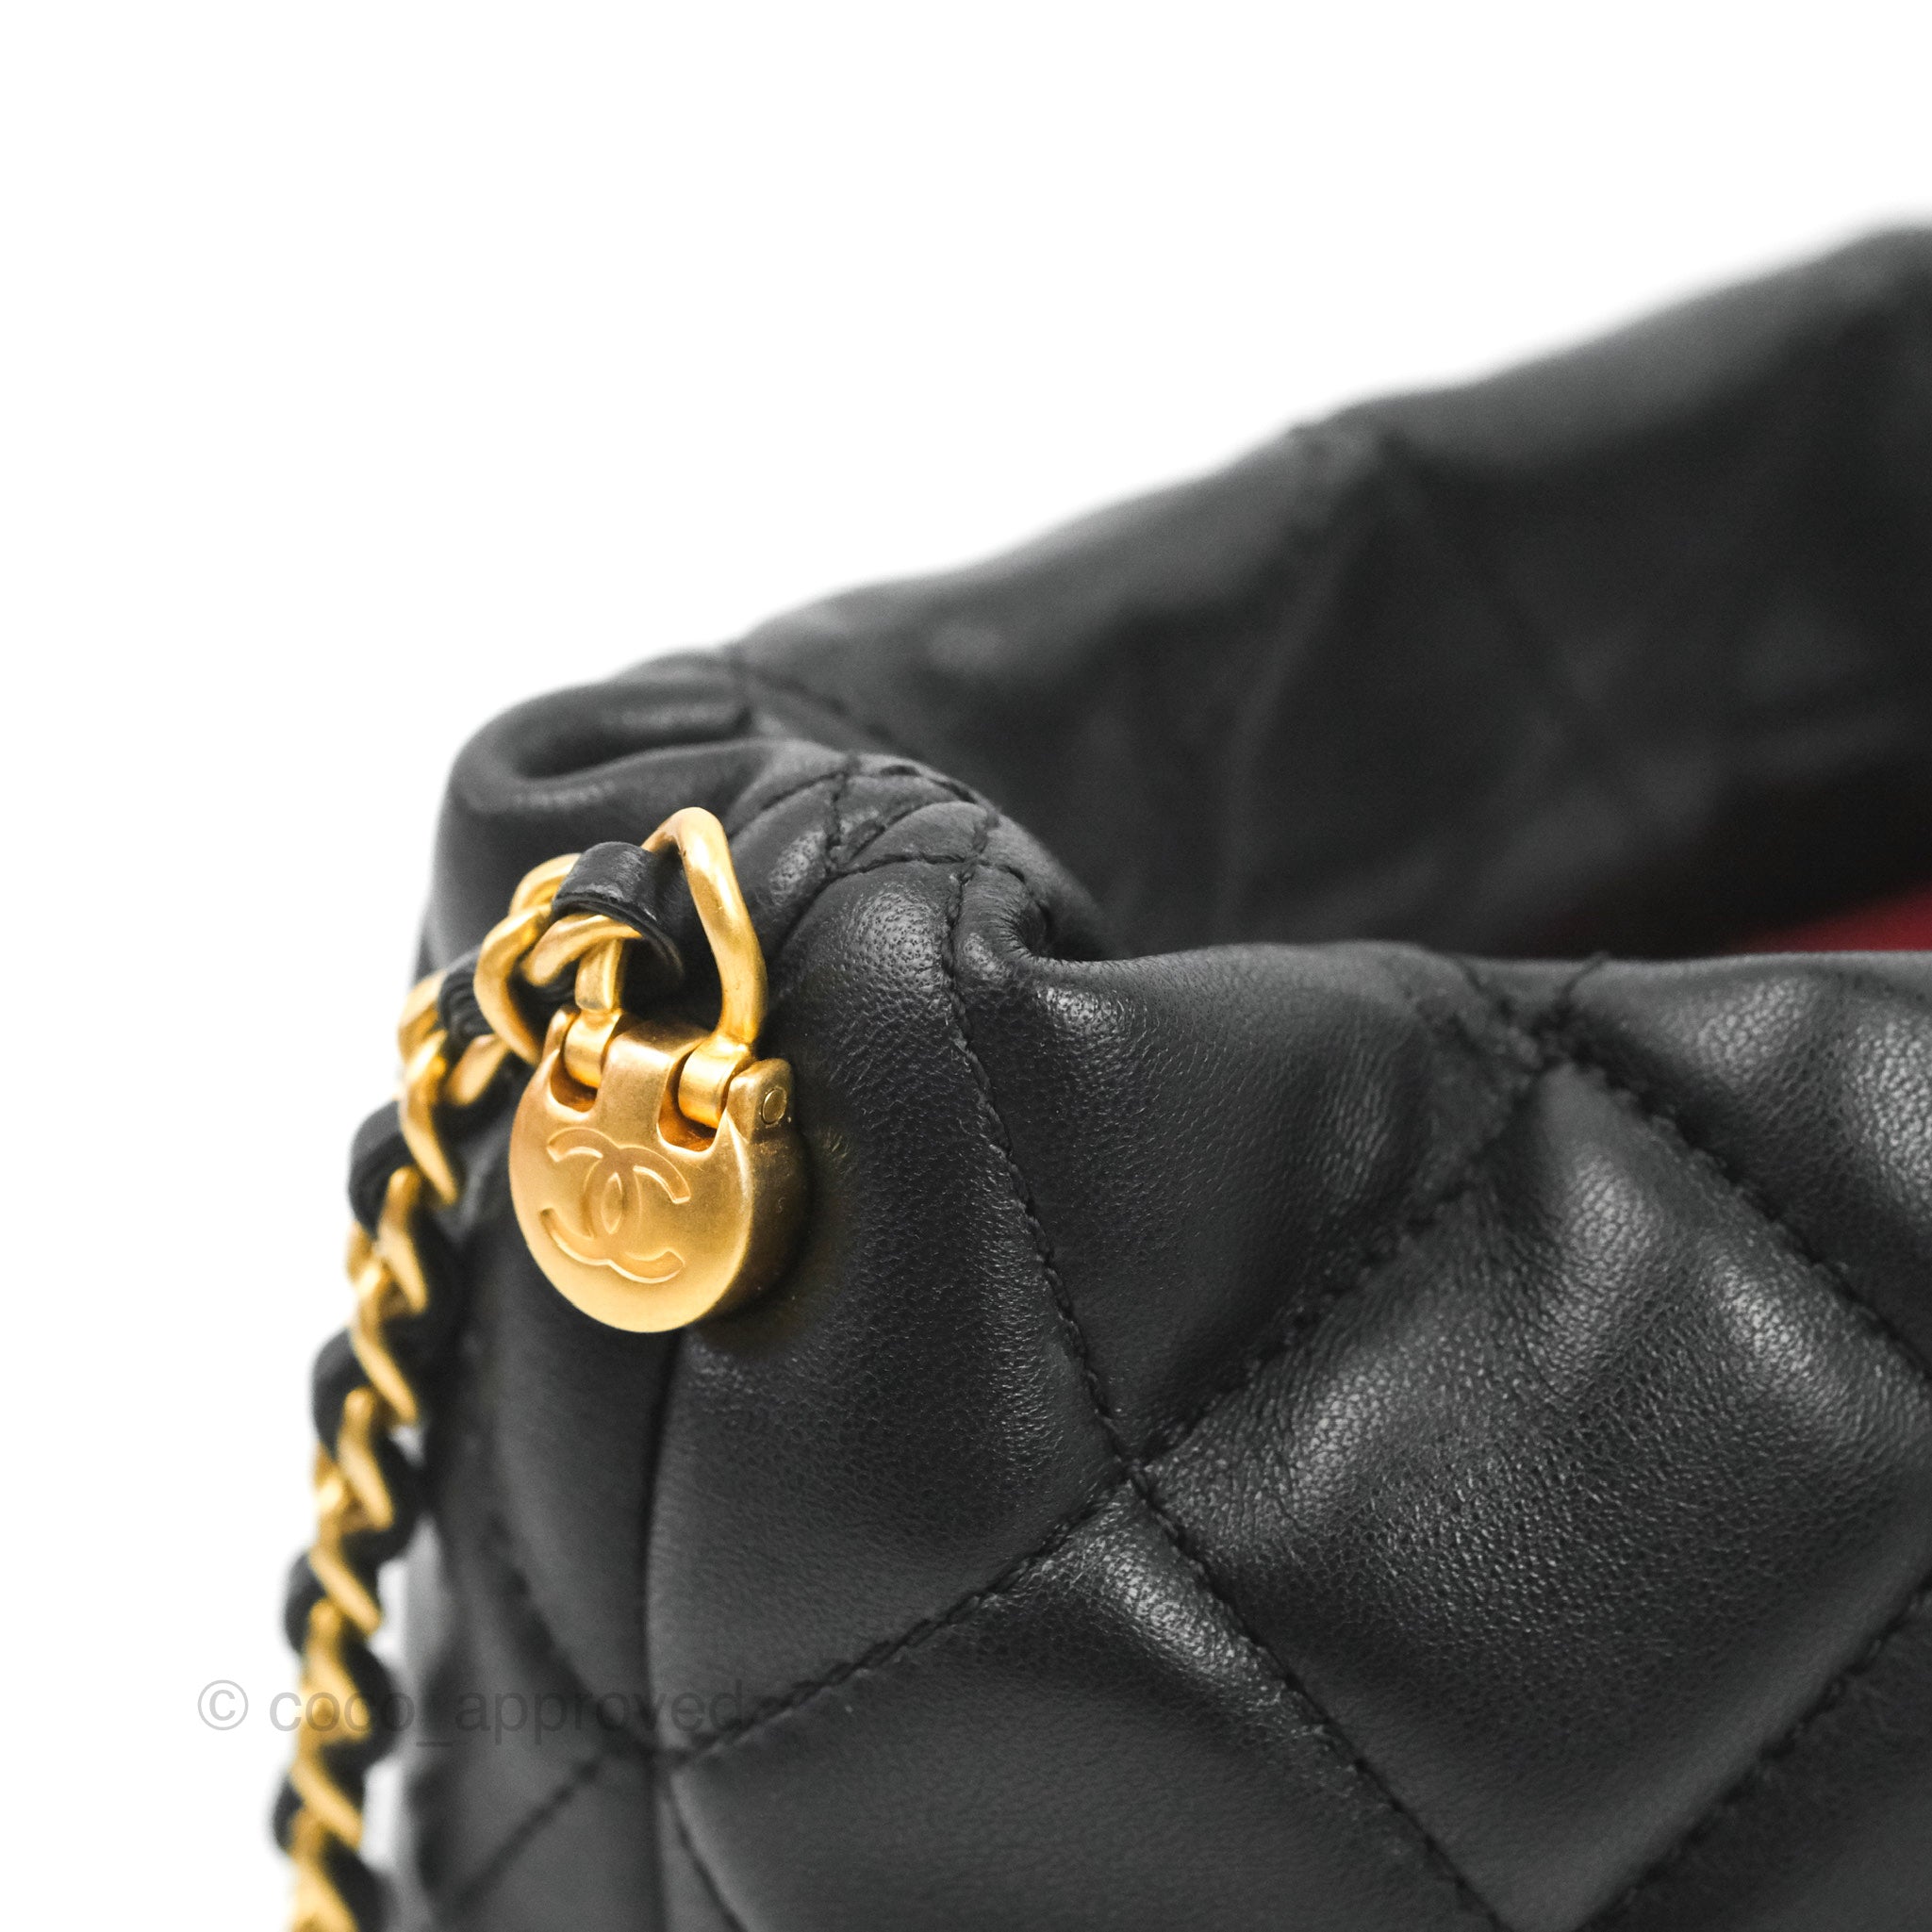 chanel quilted lambskin